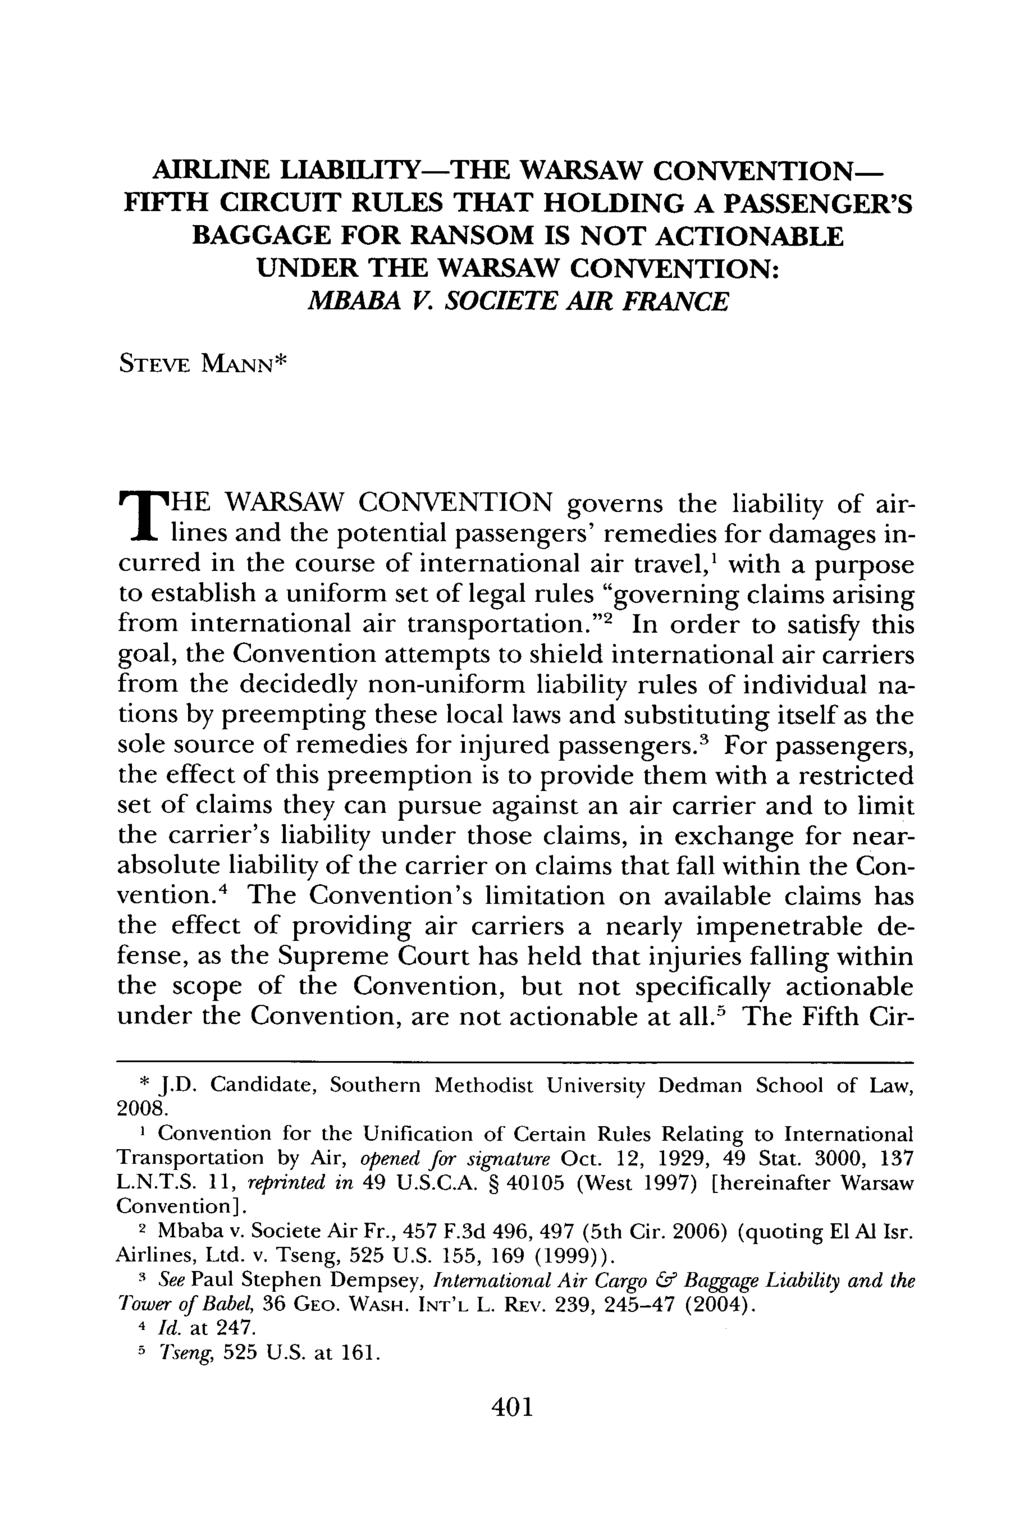 AIRLINE LIABILITY-THE WARSAW CONVENTION- FIFTH CIRCUIT RULES THAT HOLDING A PASSENGER'S BAGGAGE FOR RANSOM IS NOT ACTIONABLE UNDER THE WARSAW CONVENTION: MBABA V.